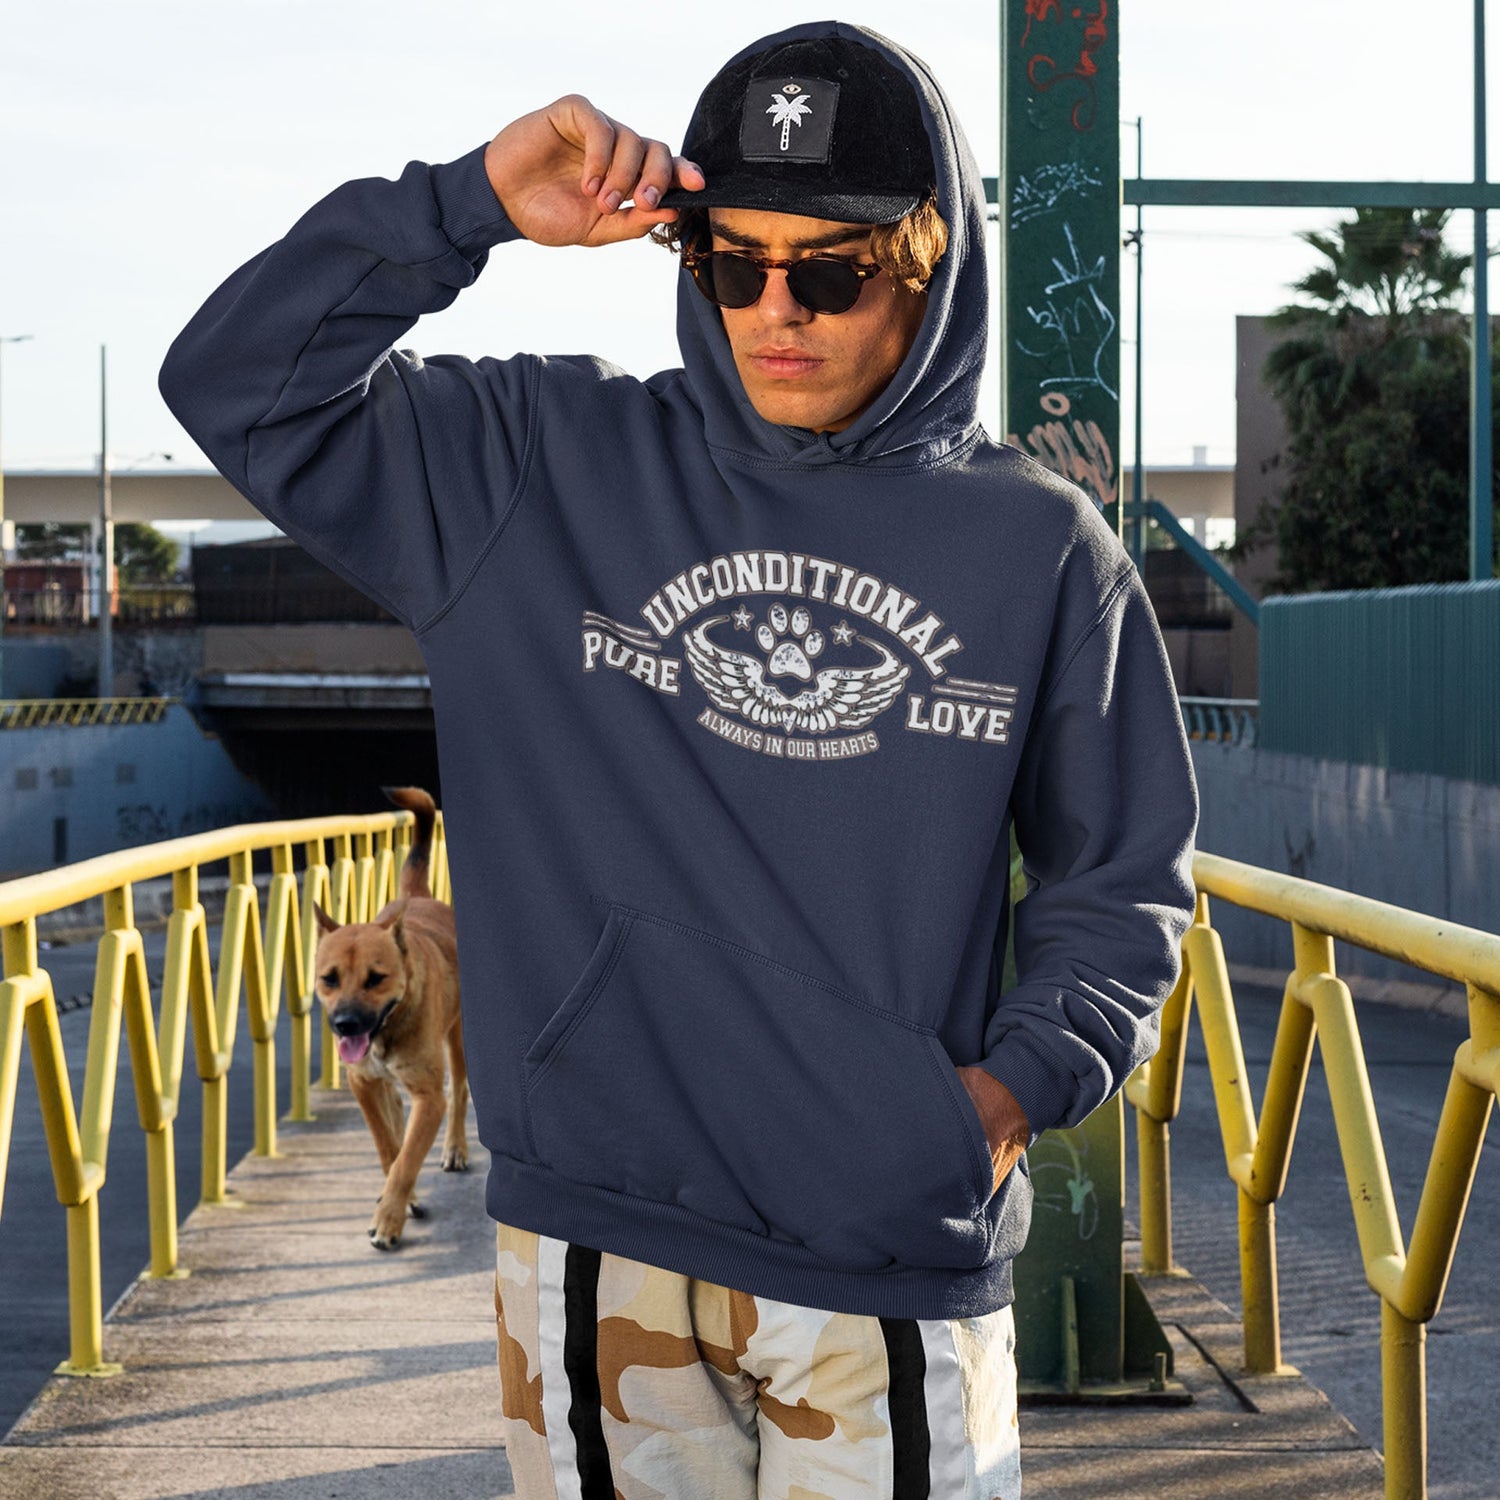  A young man strolls across a bridge, one hand reaching up to adjust his cap, while his faithful dog follows closely behind. He sports sunglasses and a stylish navy Dogs Pure Love hoodie.